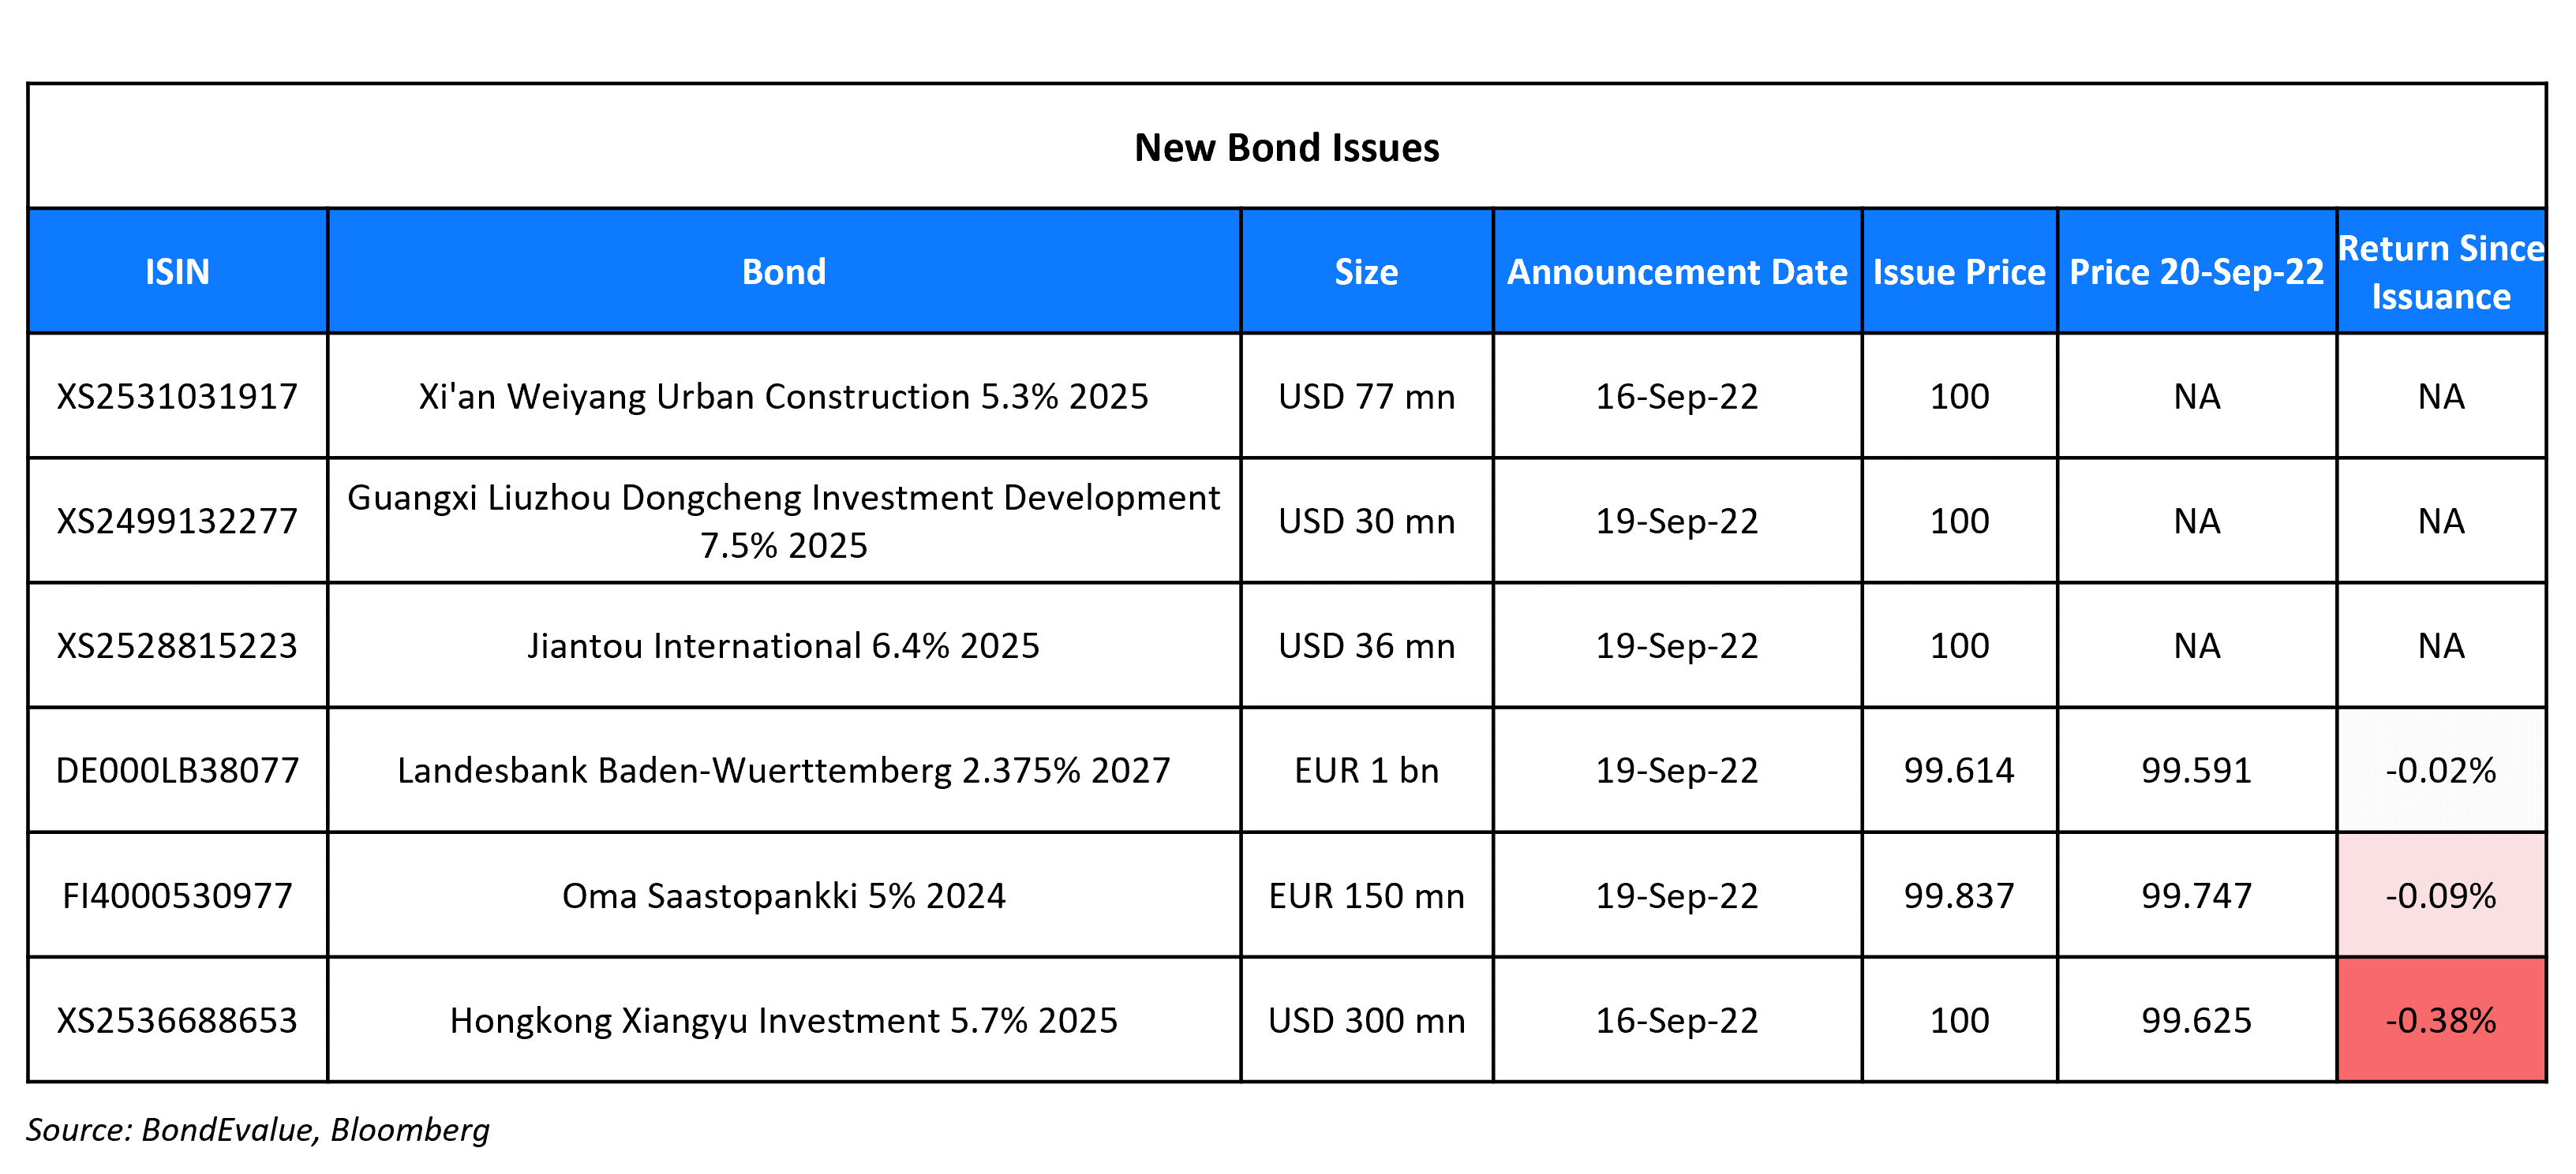 New Bond Issues 20 Sep 22